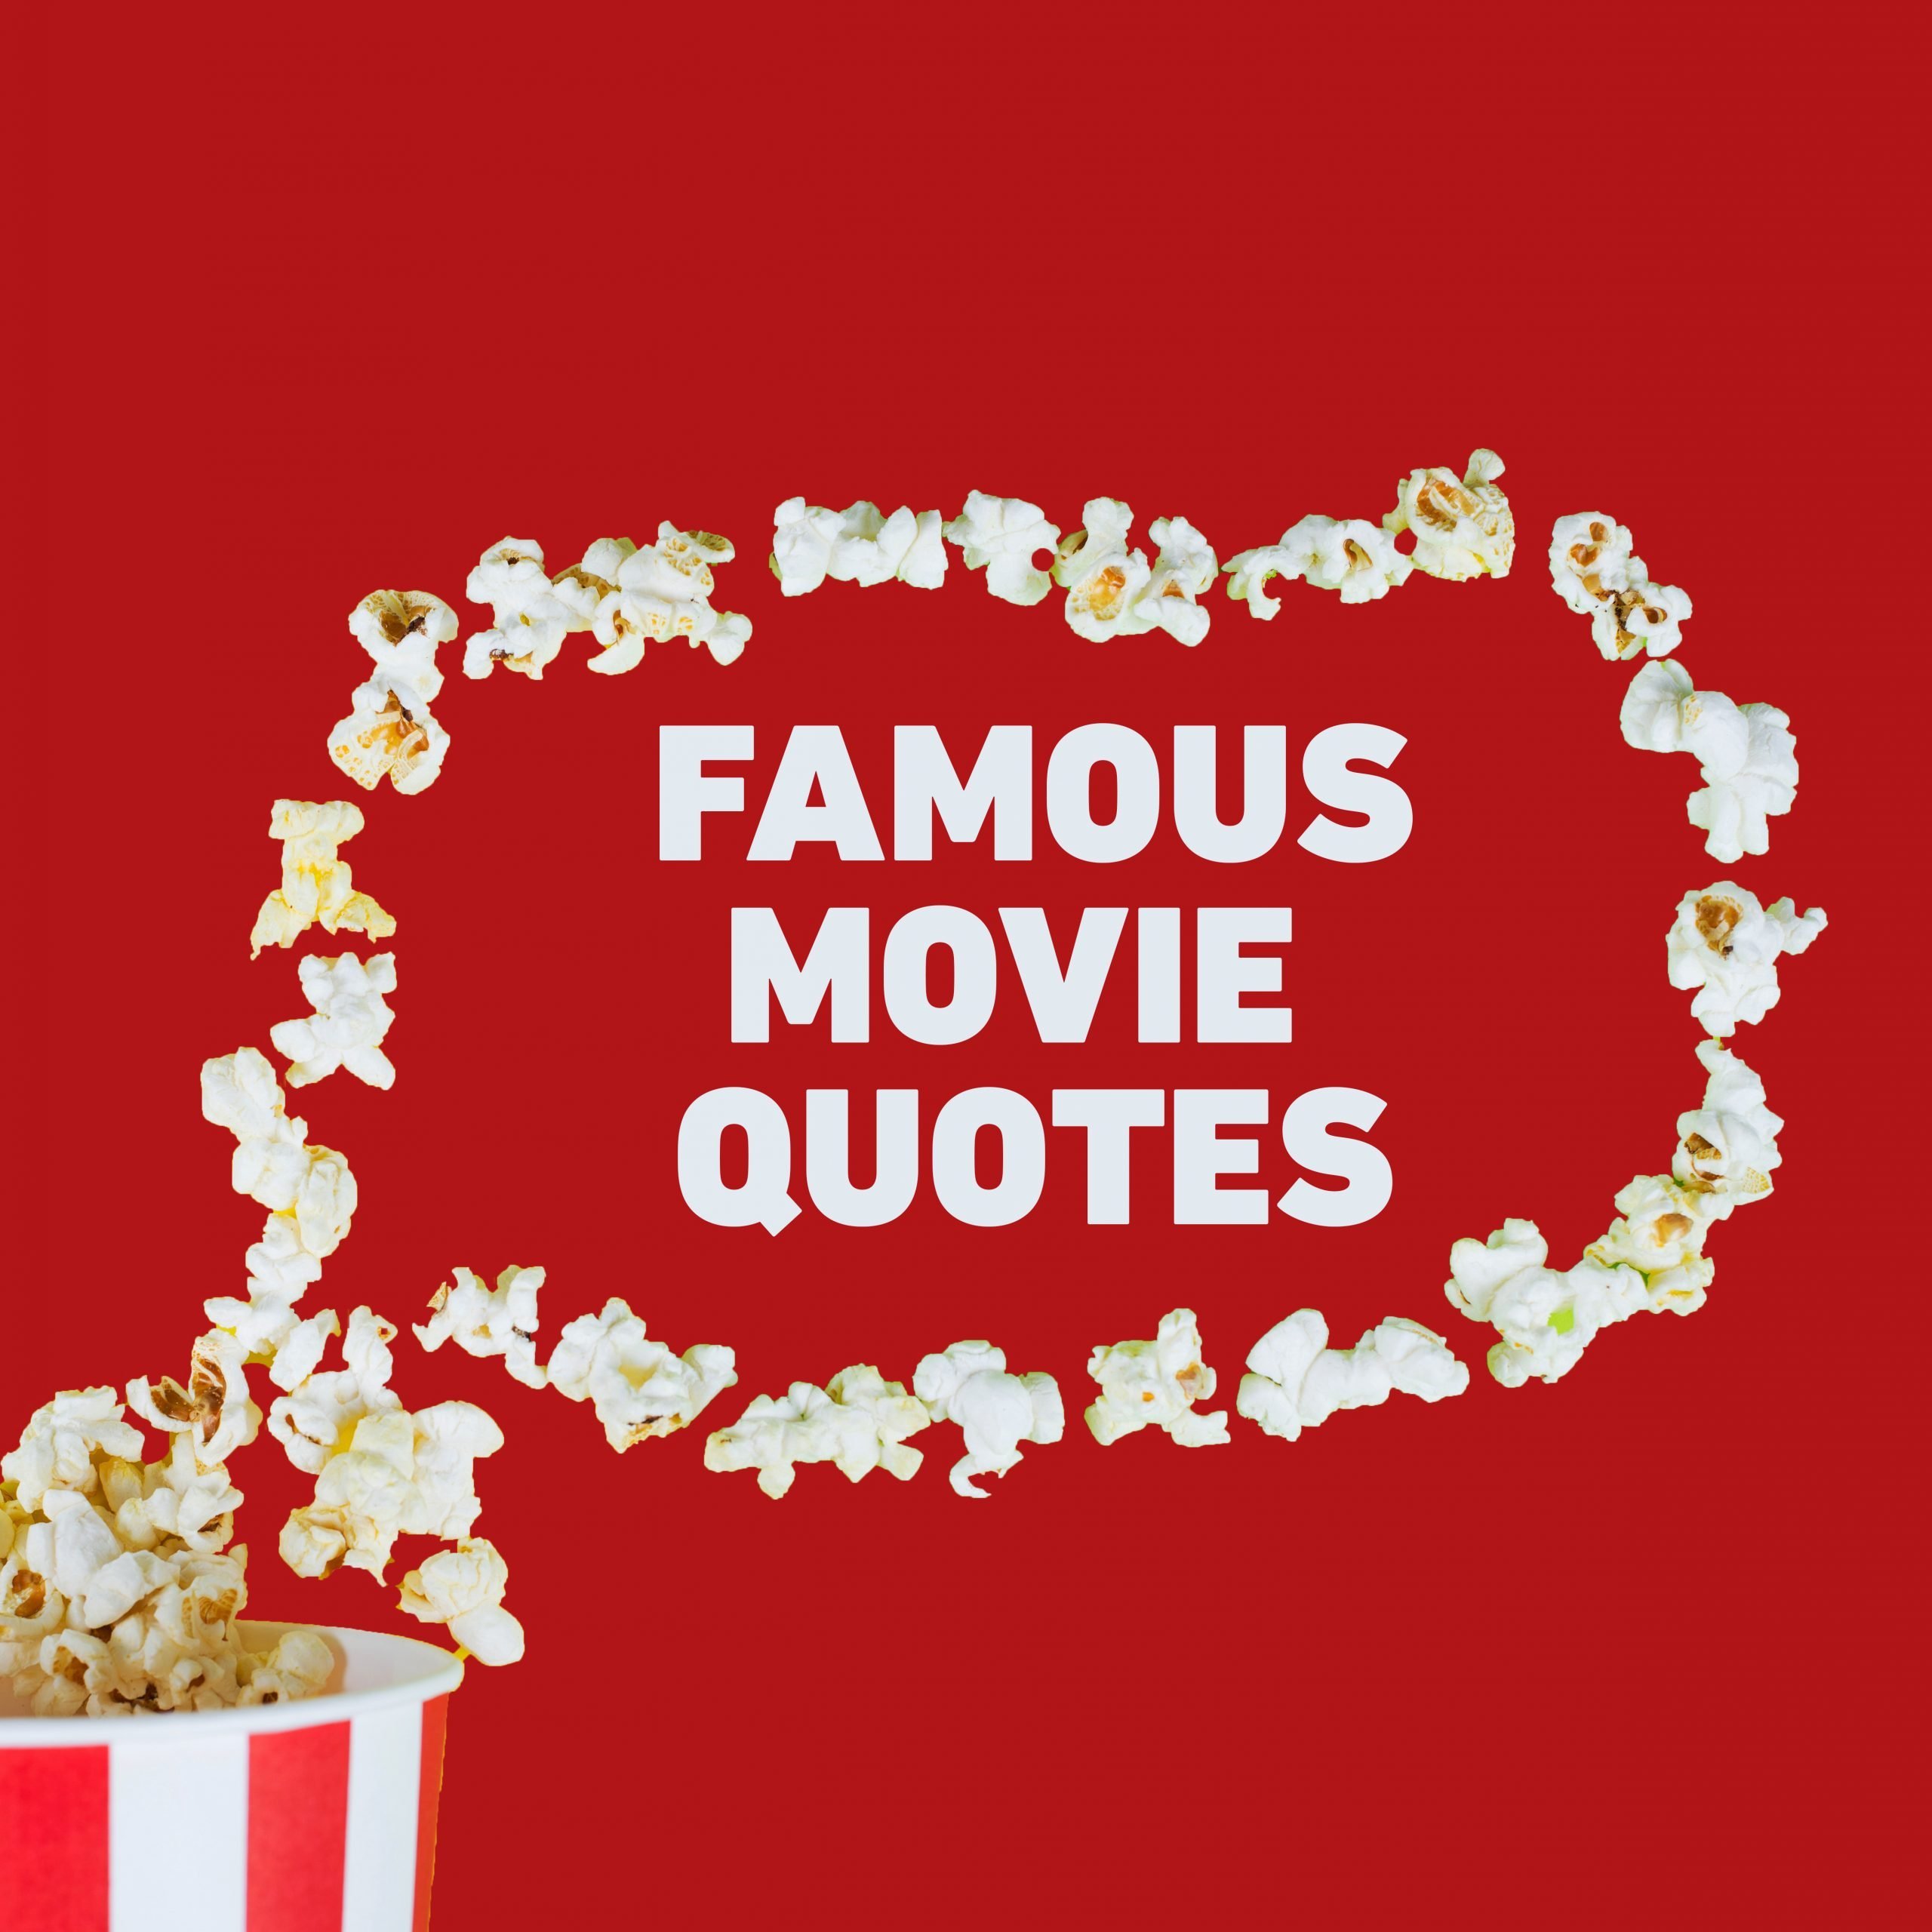 Movie Quotes: Famous, Clever & Memorable Film Quotes 🎥